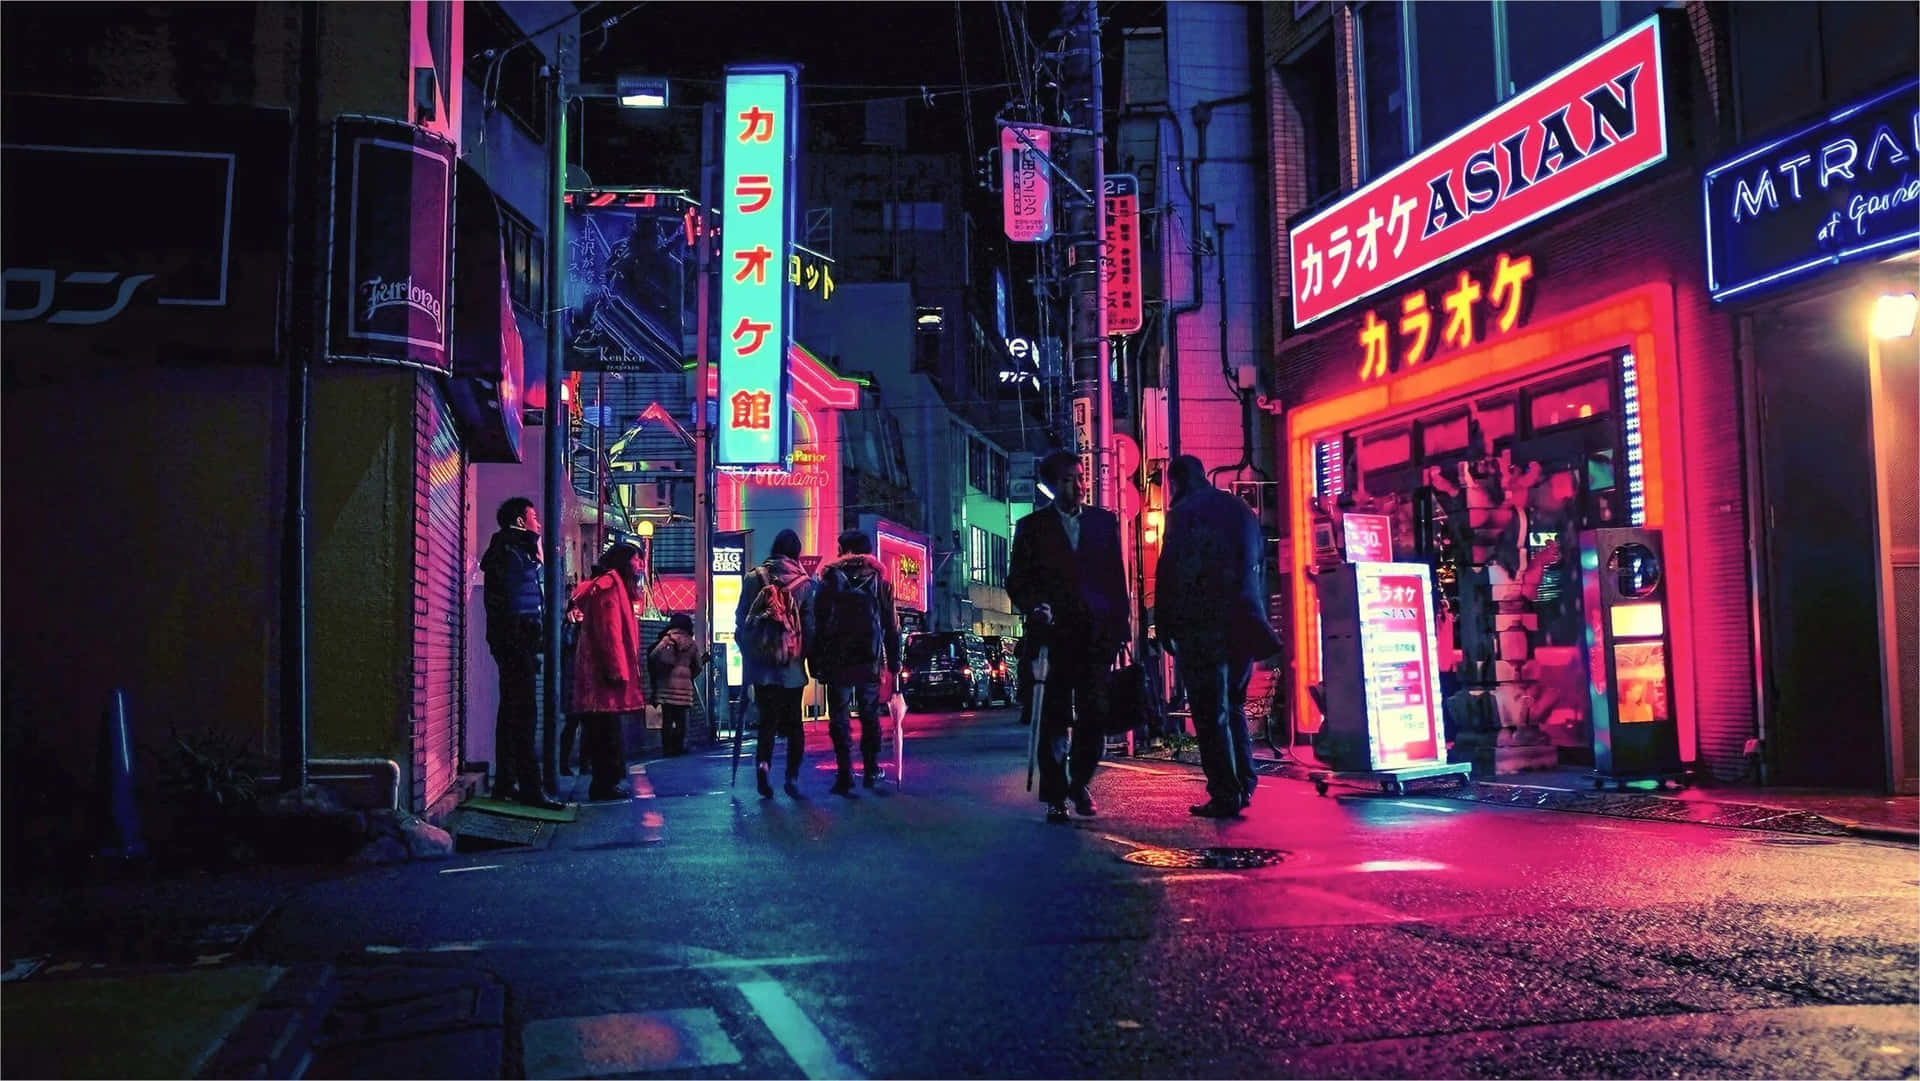 No matter the hour, lights light up the night in Tokyo